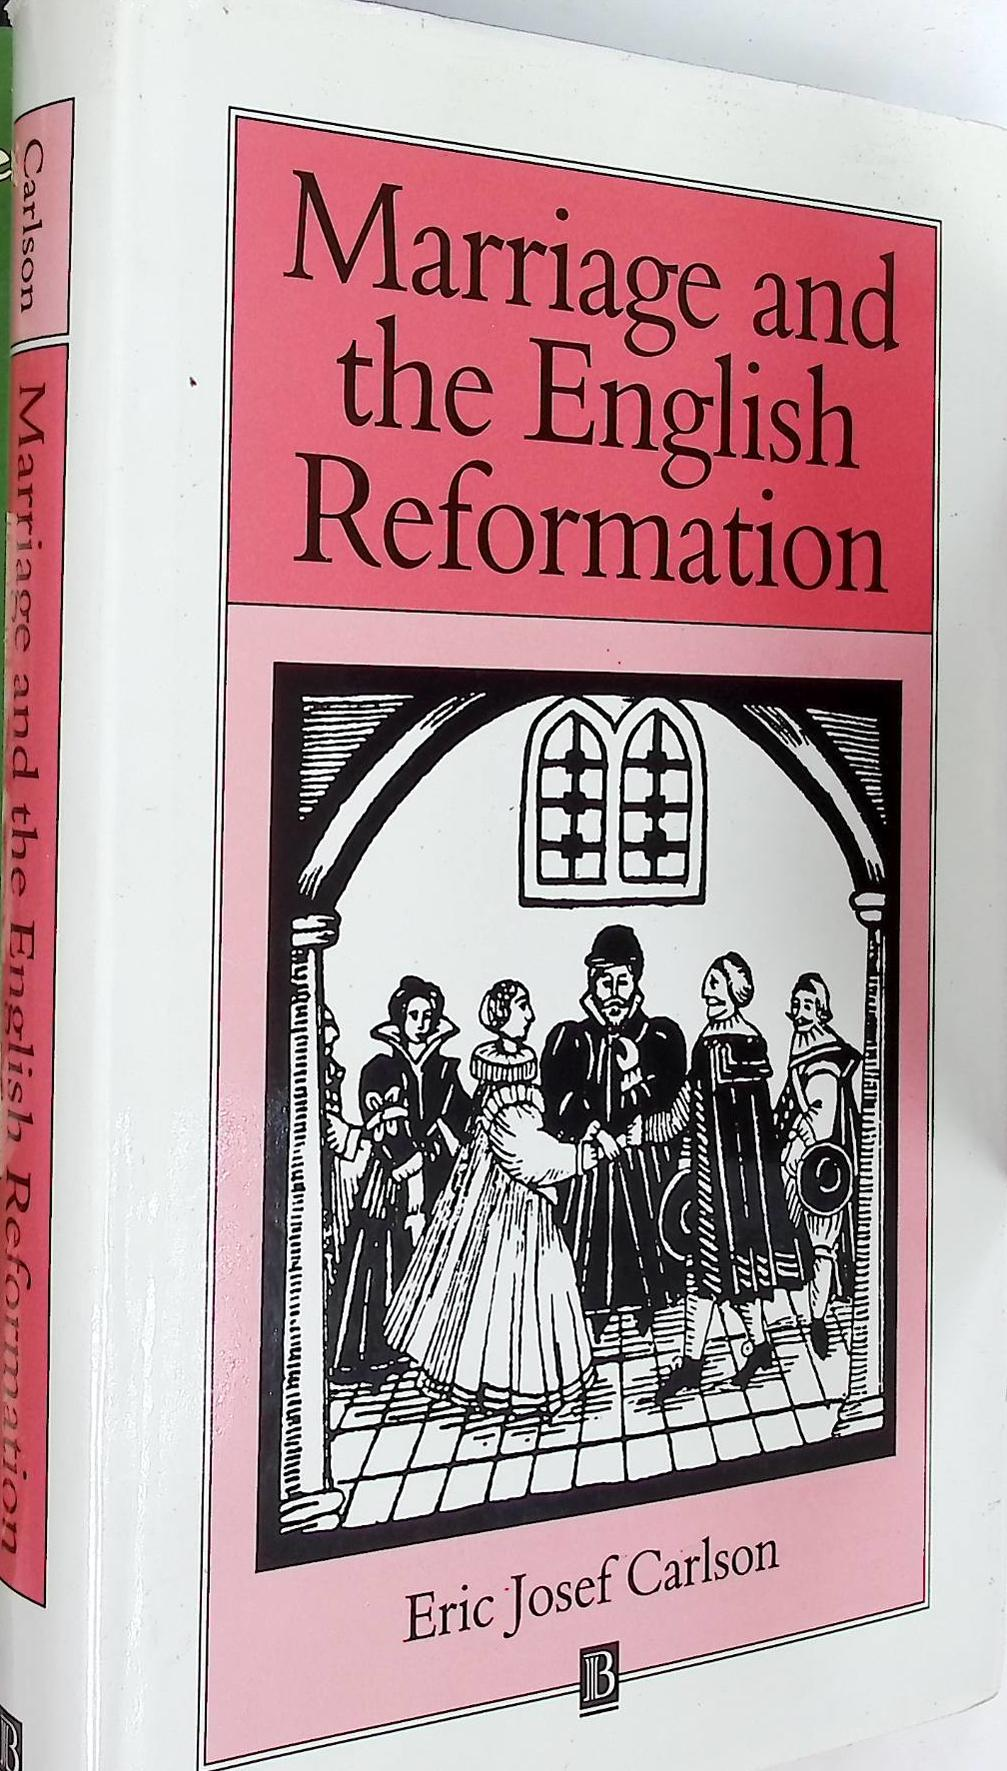 Marriage and the English Reformation